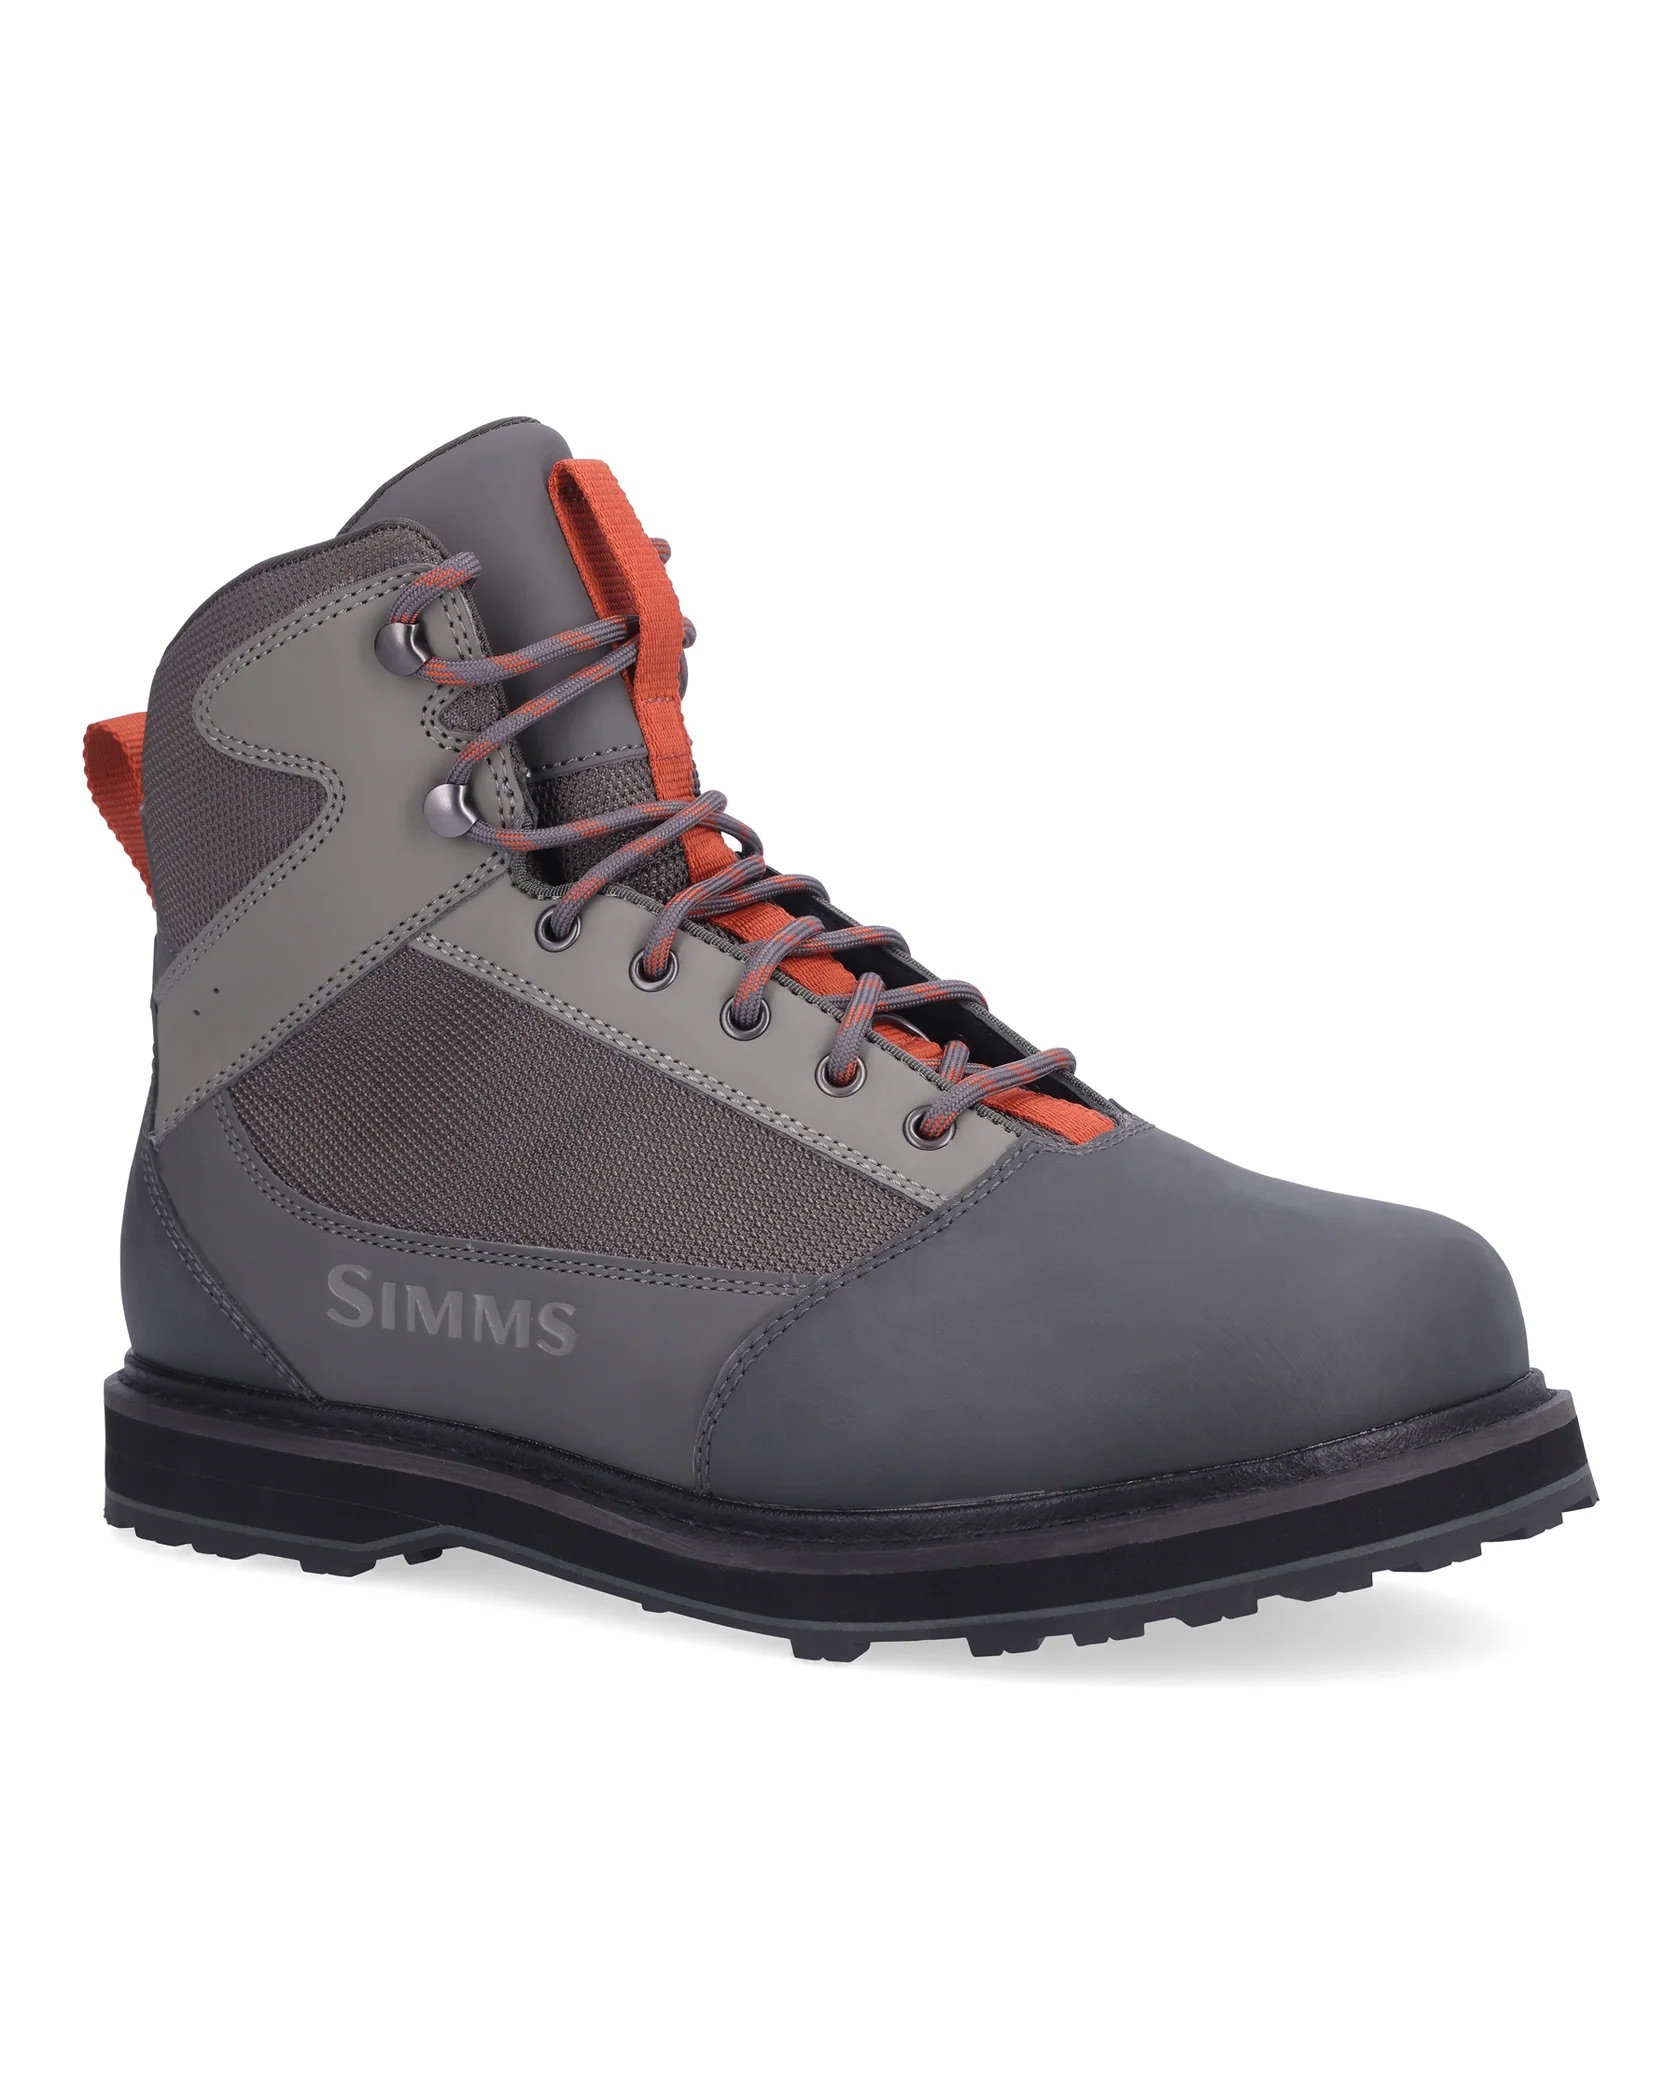 Simms Tributary Wading Boot - Rubber - Size 10